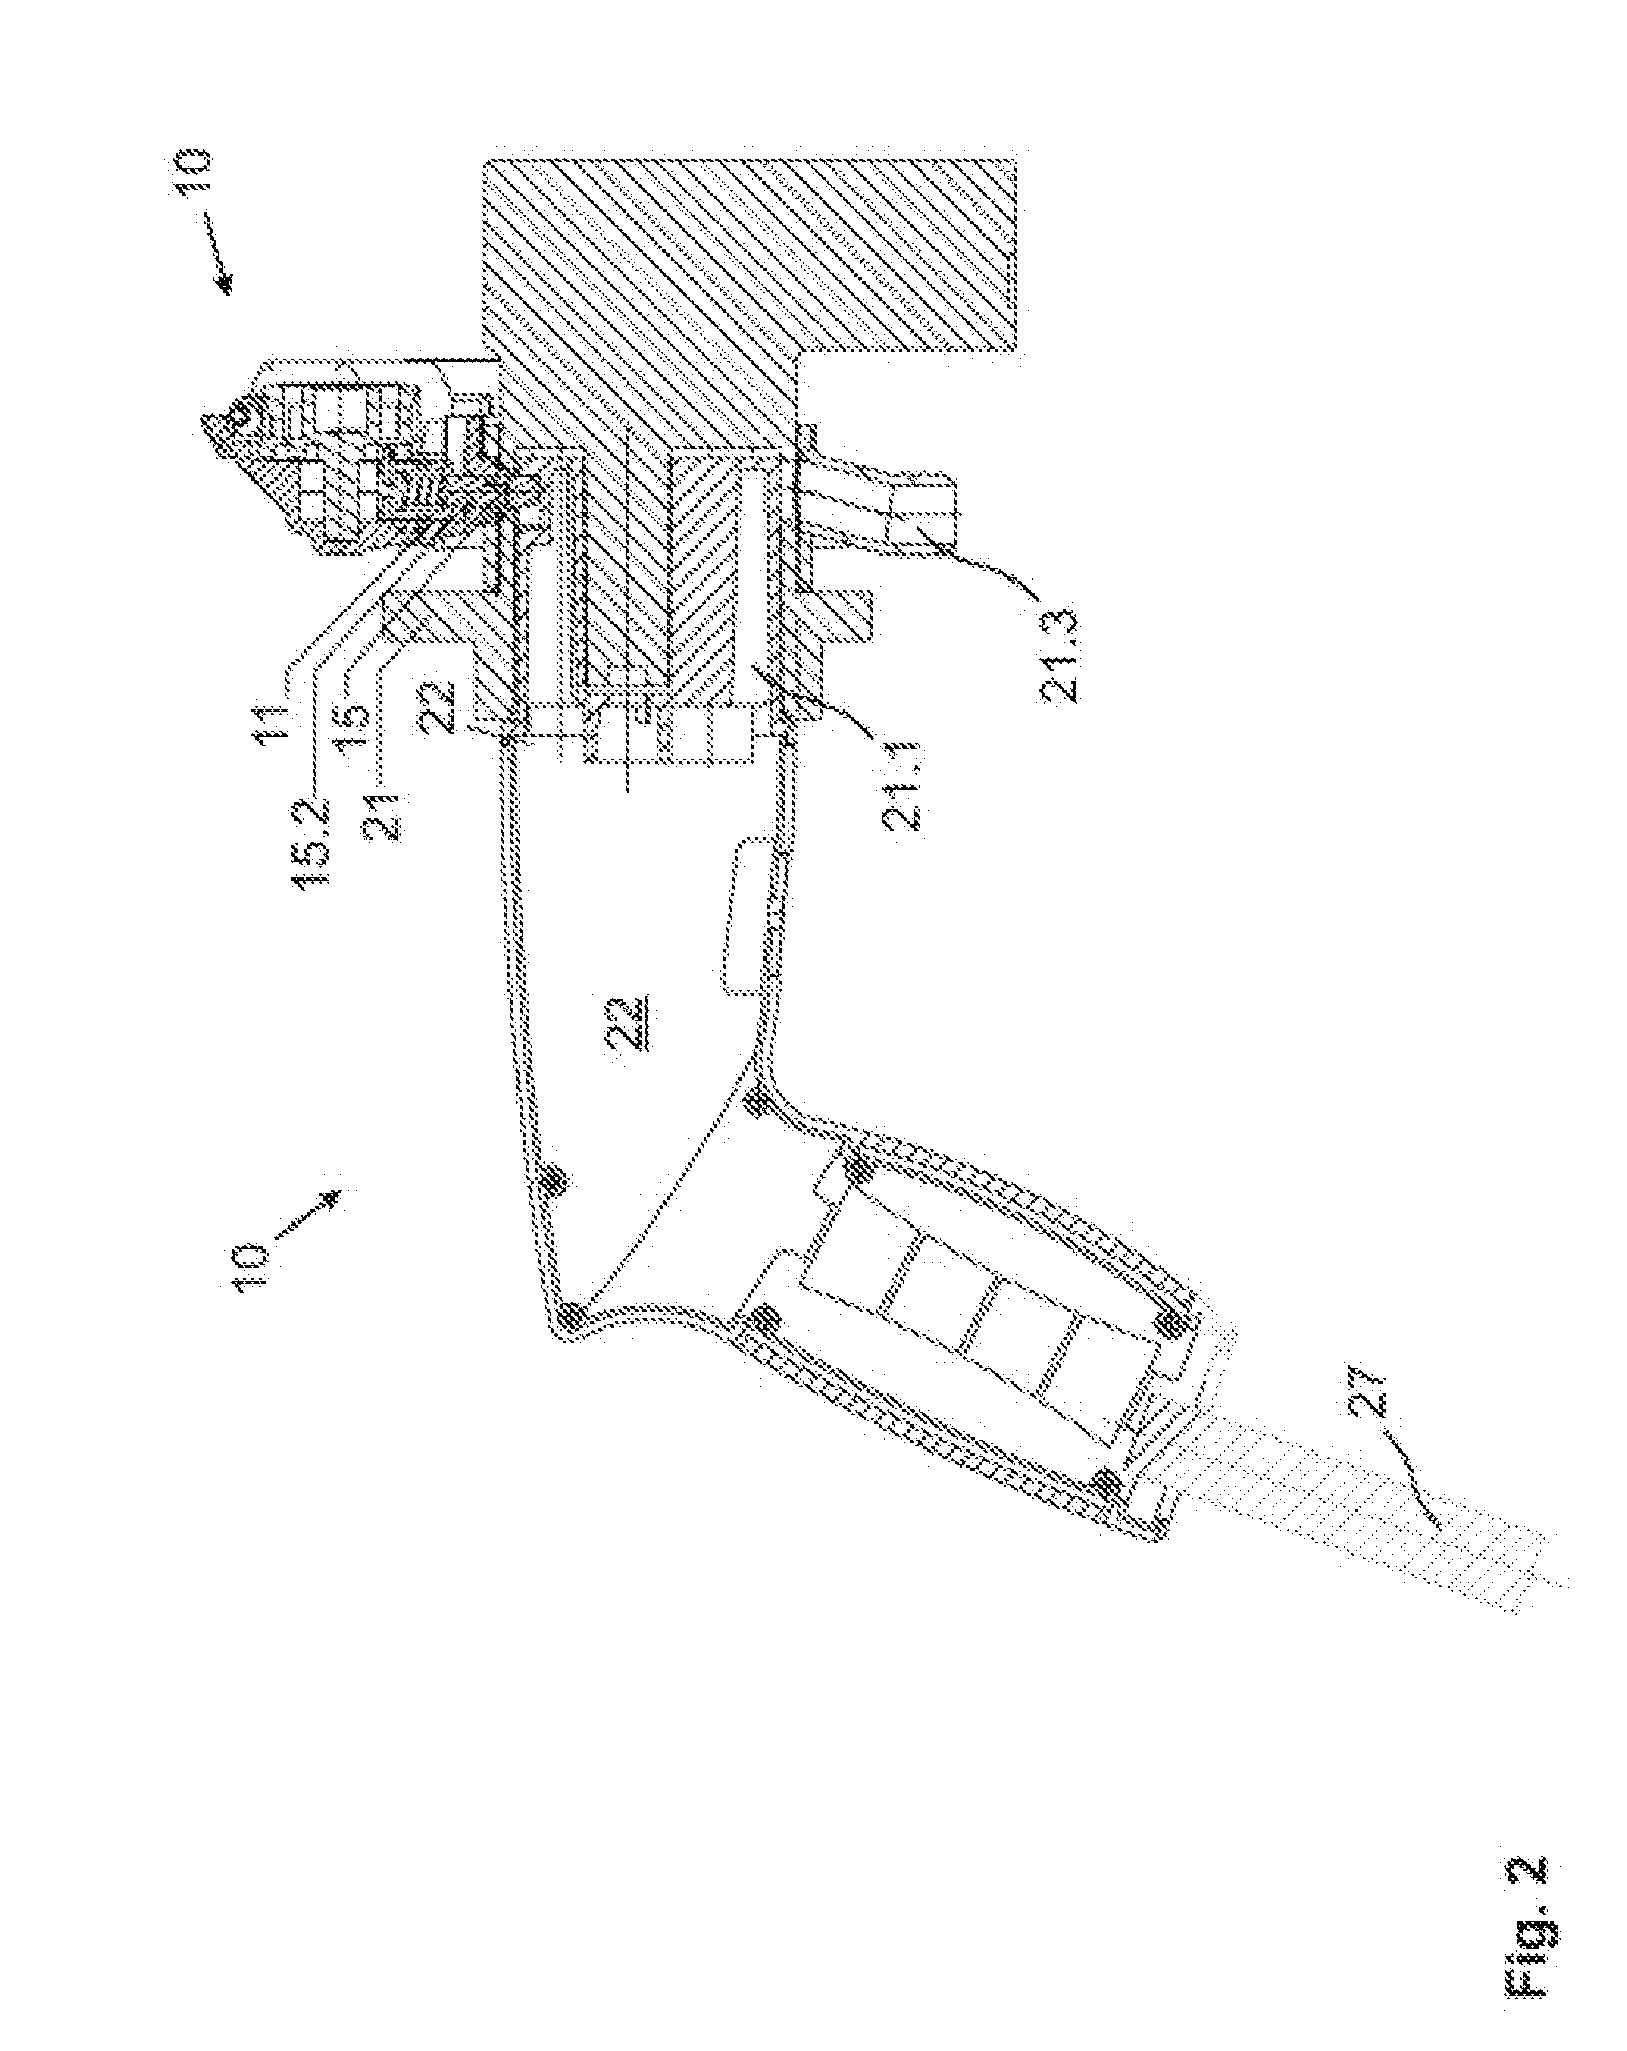 Locking Apparatus for electric charging cables or flaps